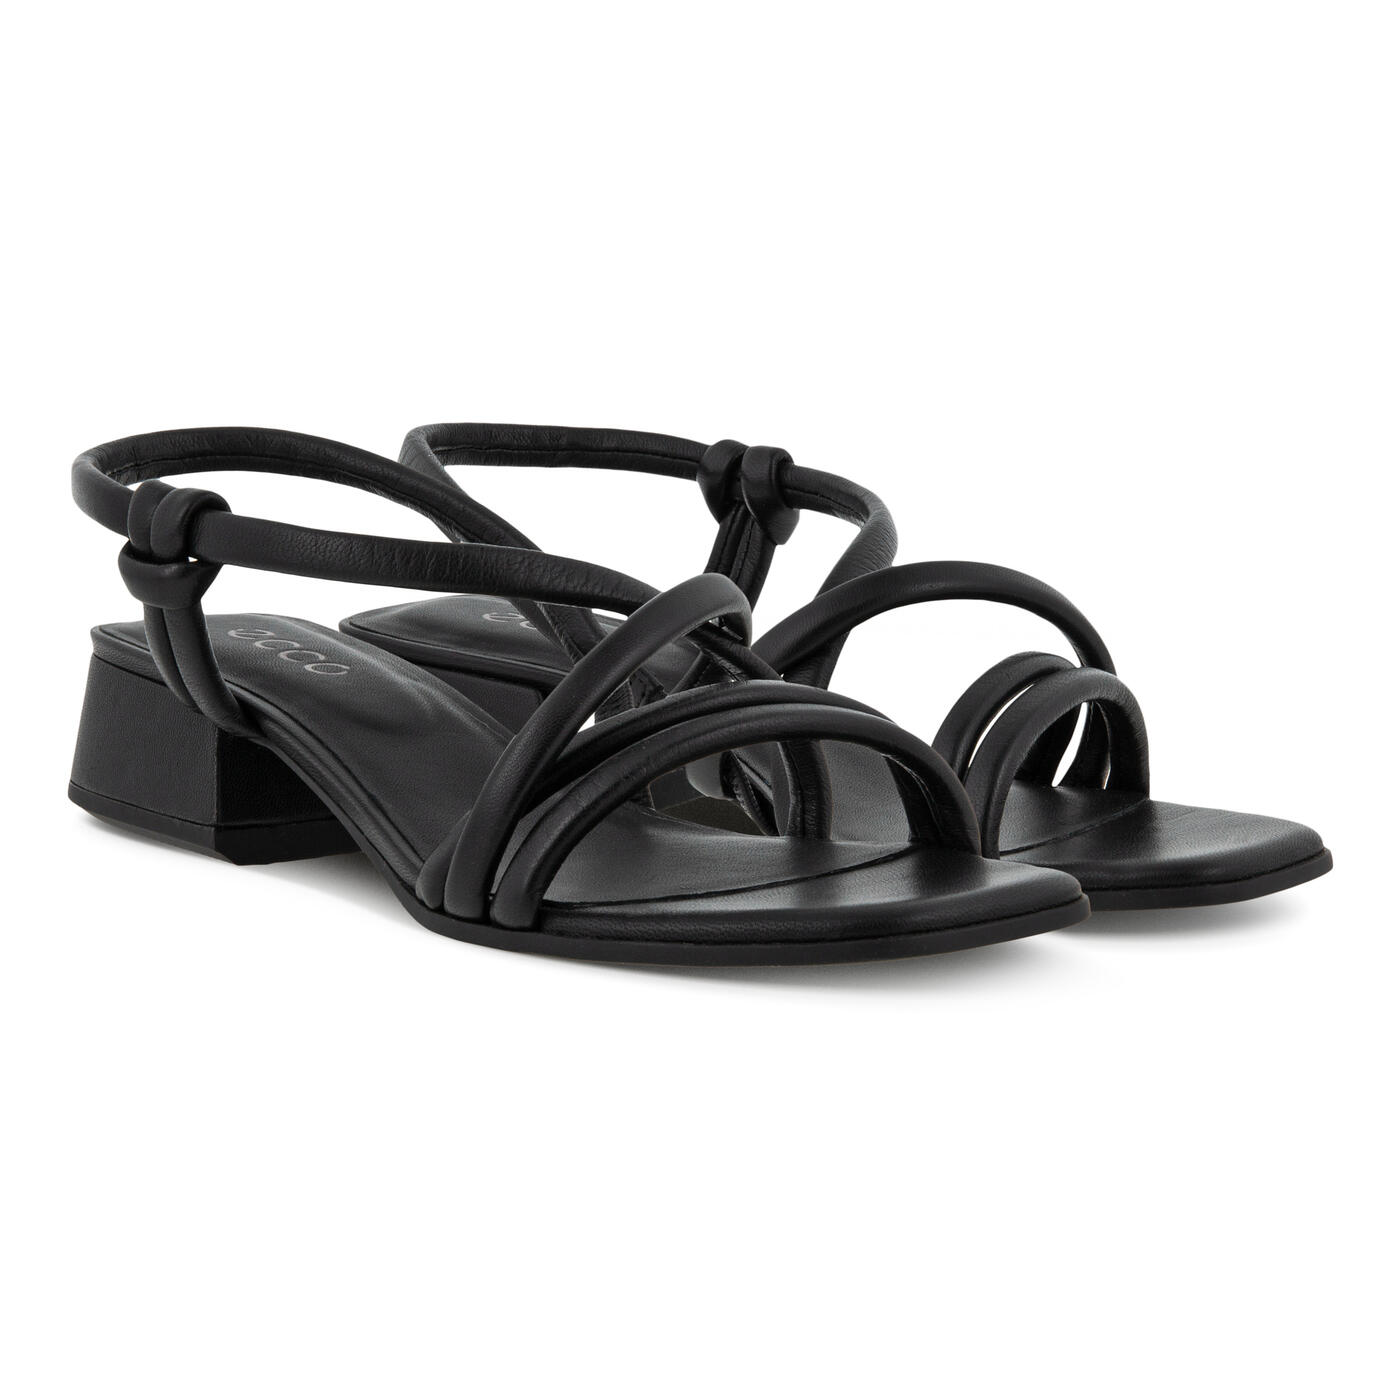 ECCO ELEVATE SQUARED Women's SANDAL | Official ECCO® Shoes